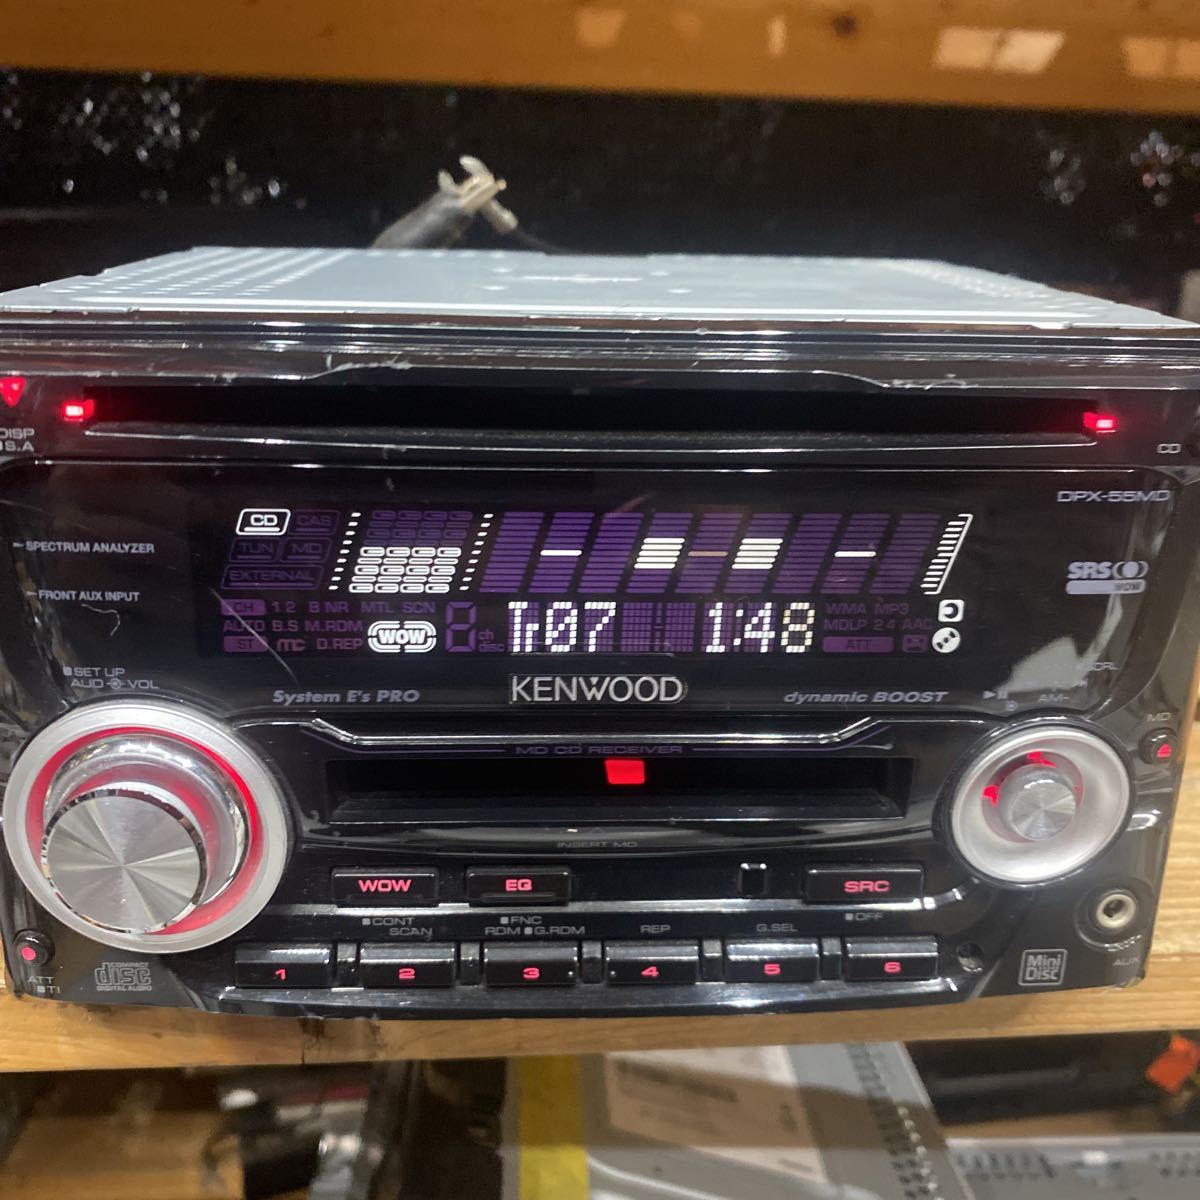 KENWOOD CD/MDレシーバー　DPX-55MD AUX_画像2